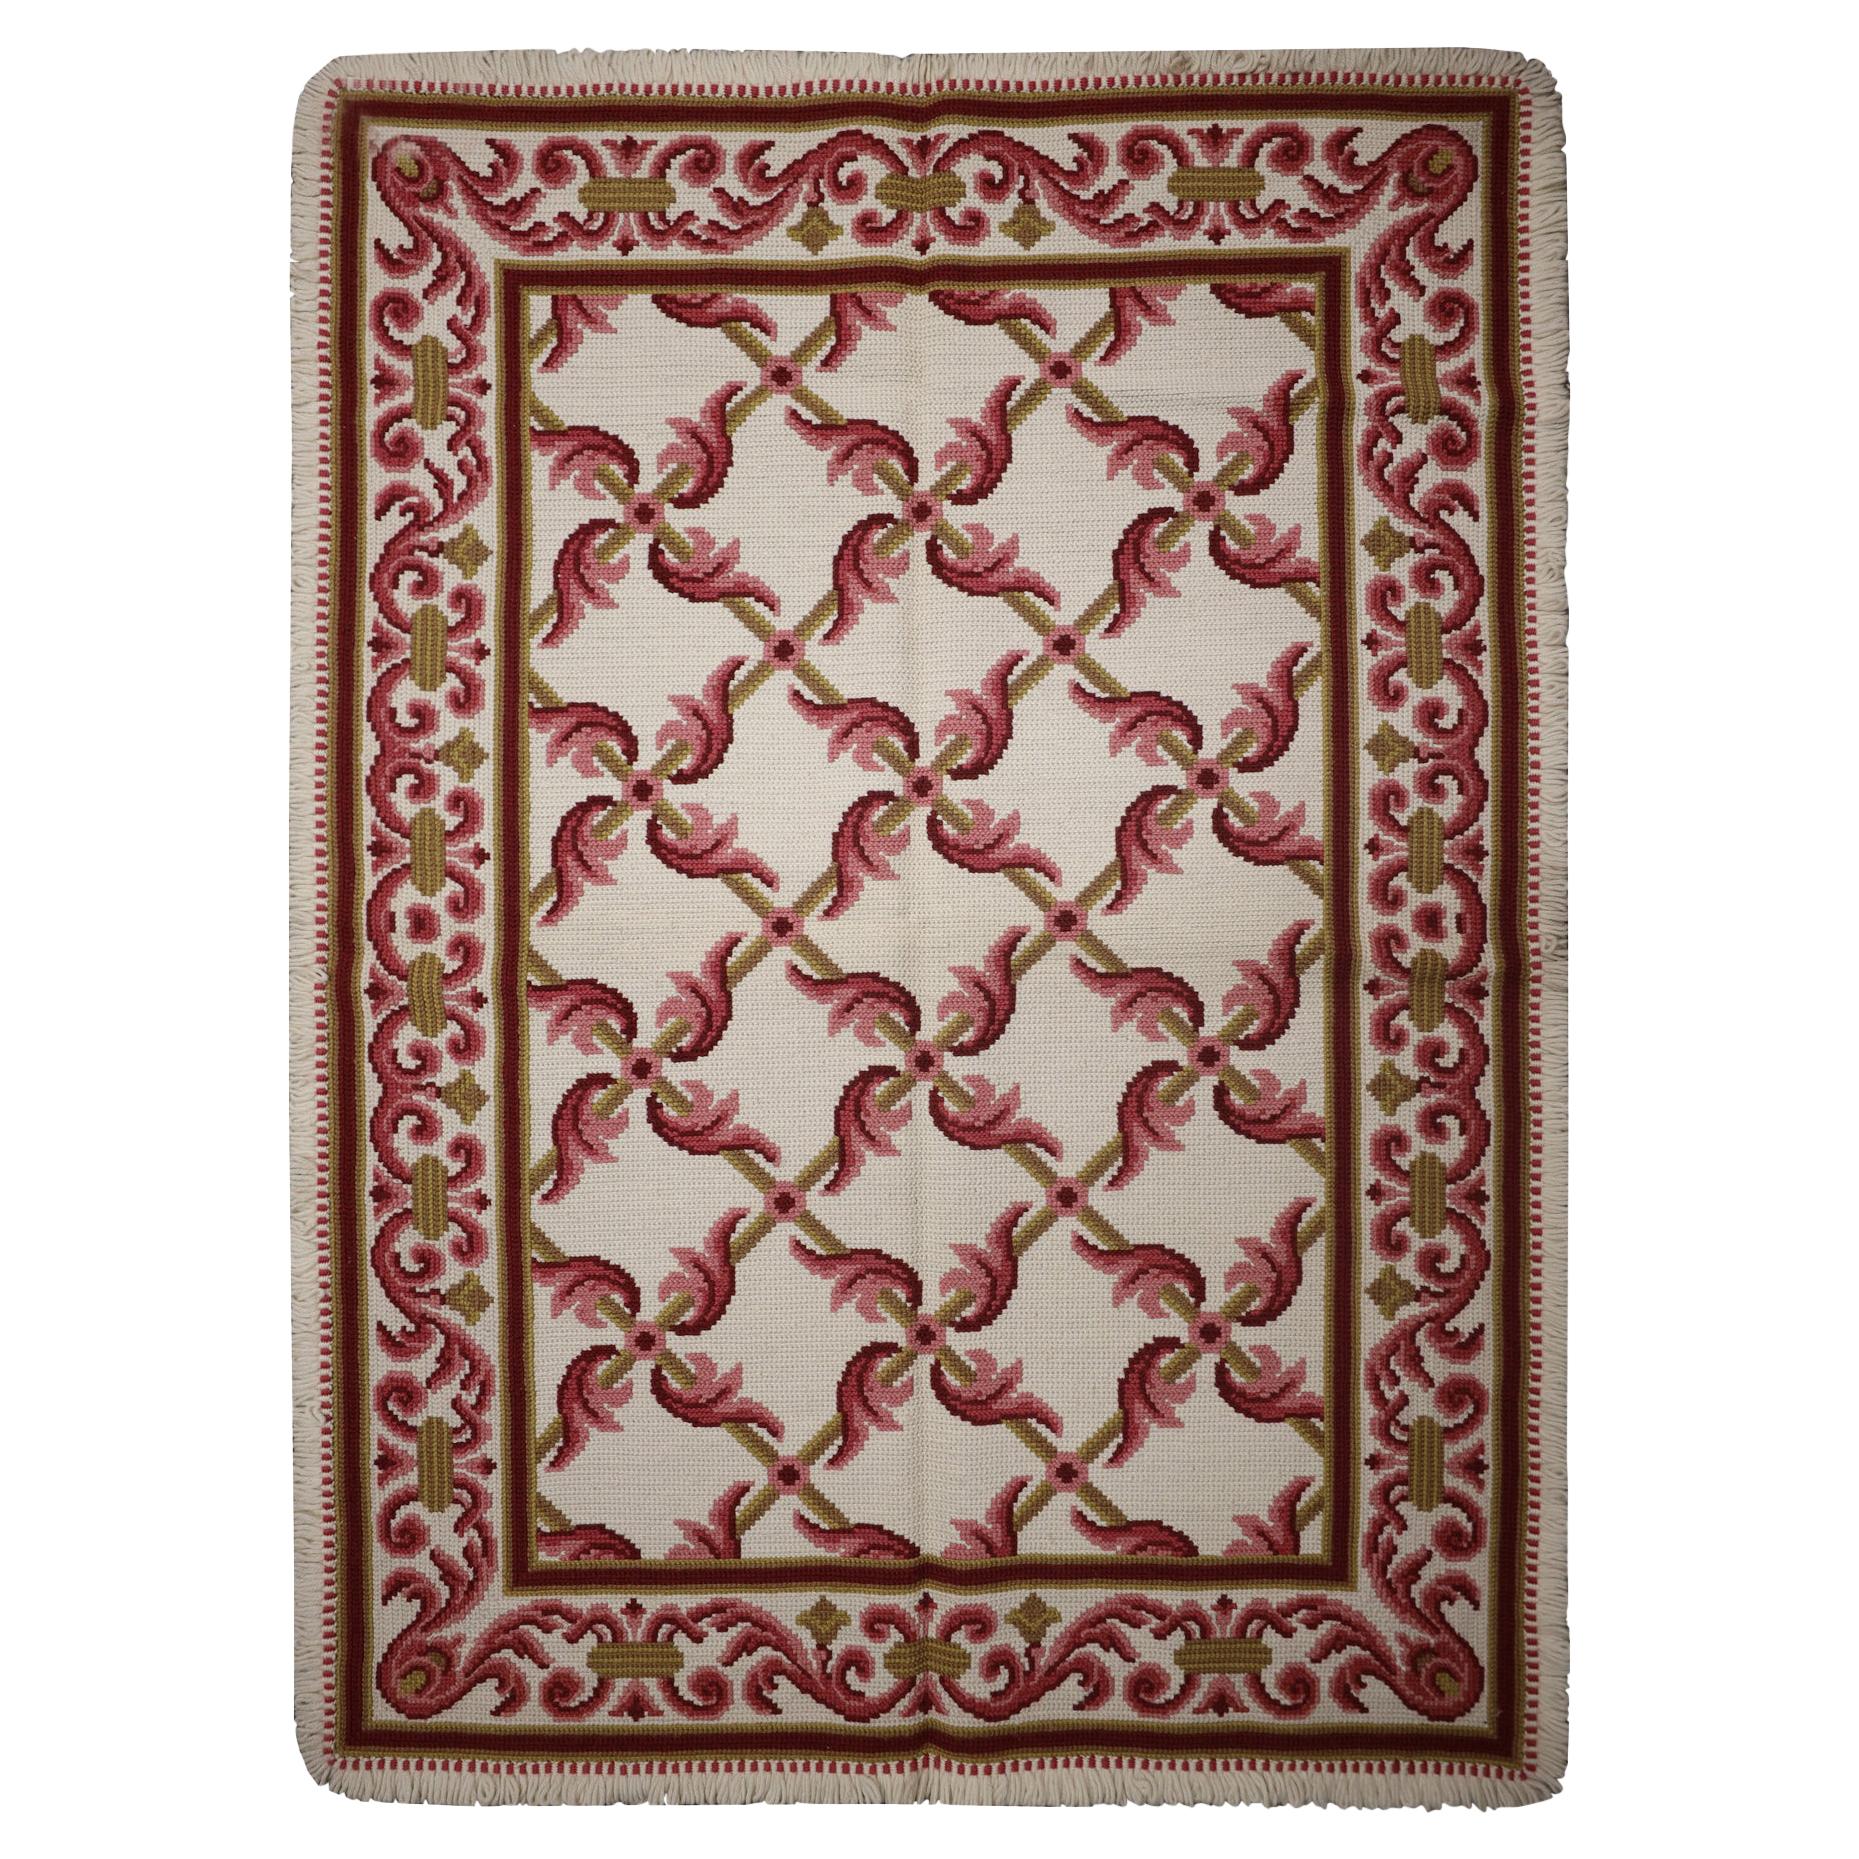 Traditional Handwoven Needlepoint Area Rug Wool Pink Carpet- 120x170cm For Sale